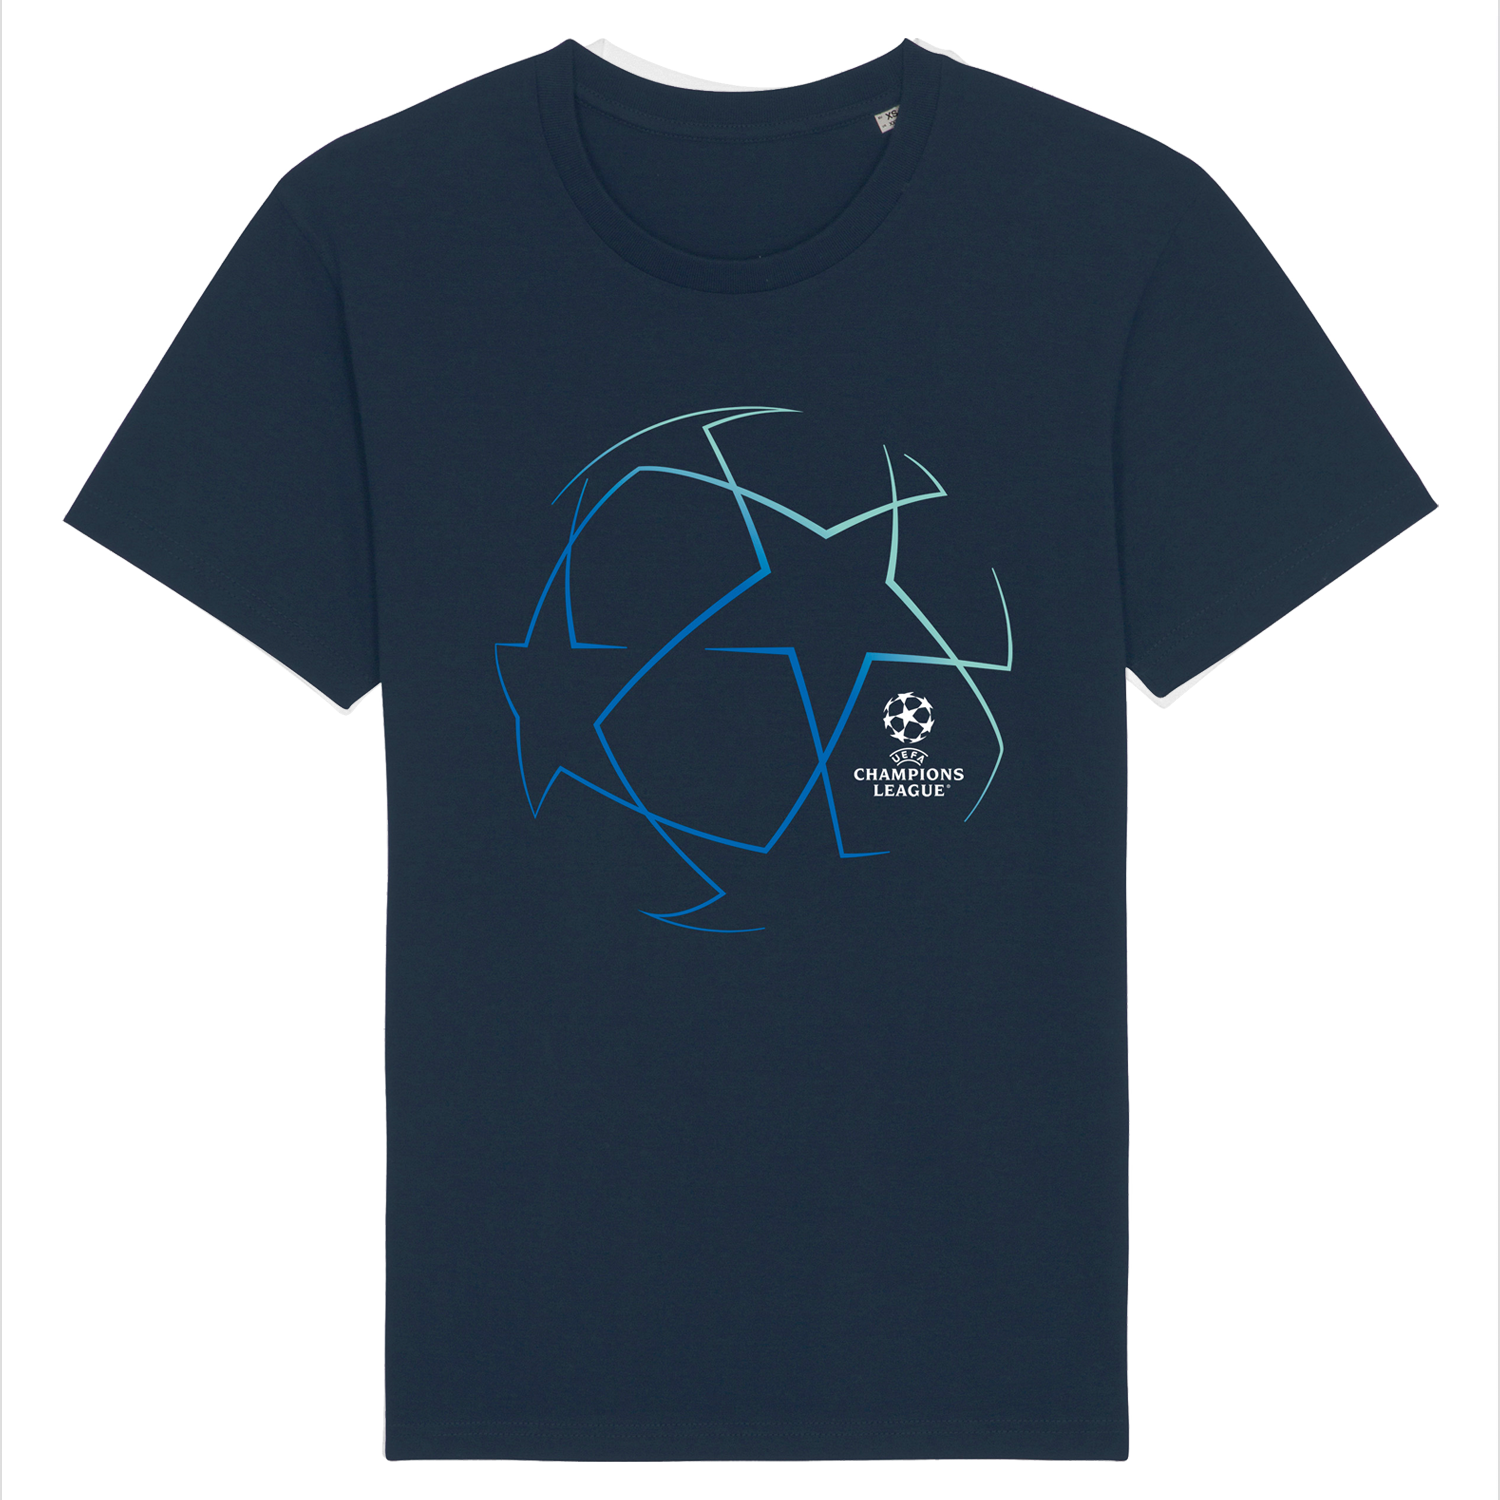 UEFA Champions League - Starball Navy T-Shirt UEFA Club Competitions Online Store